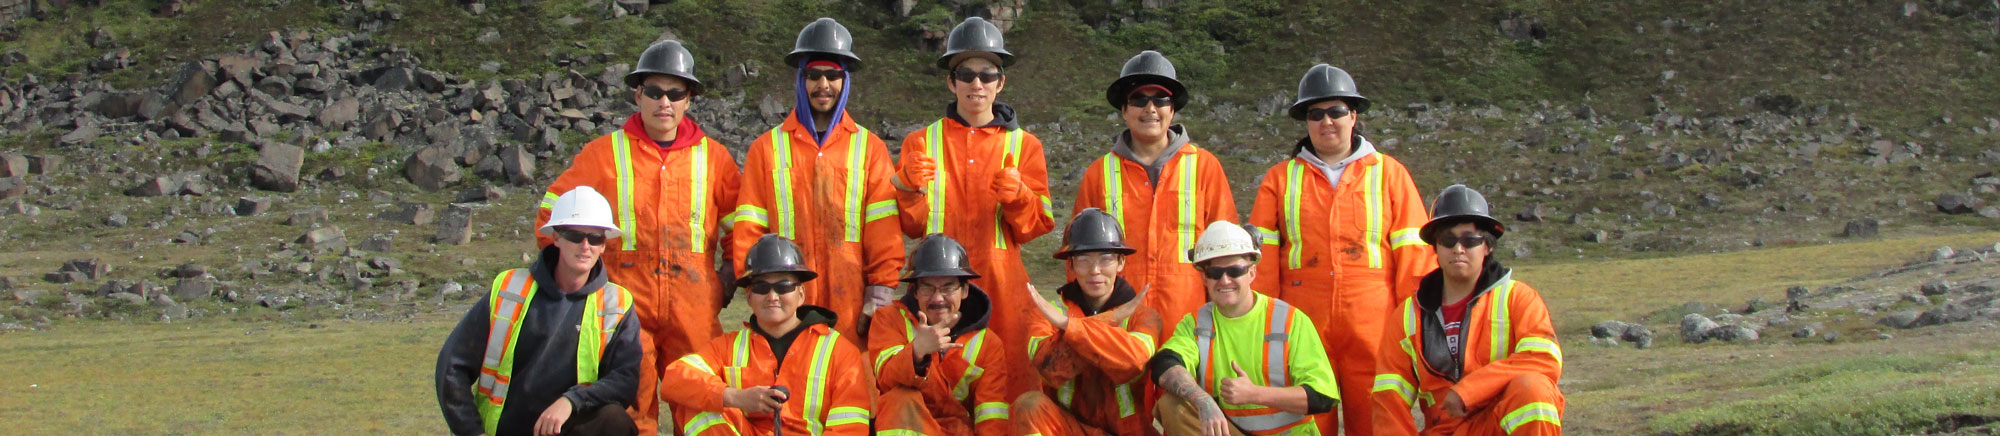 Geotech employees pose for camera